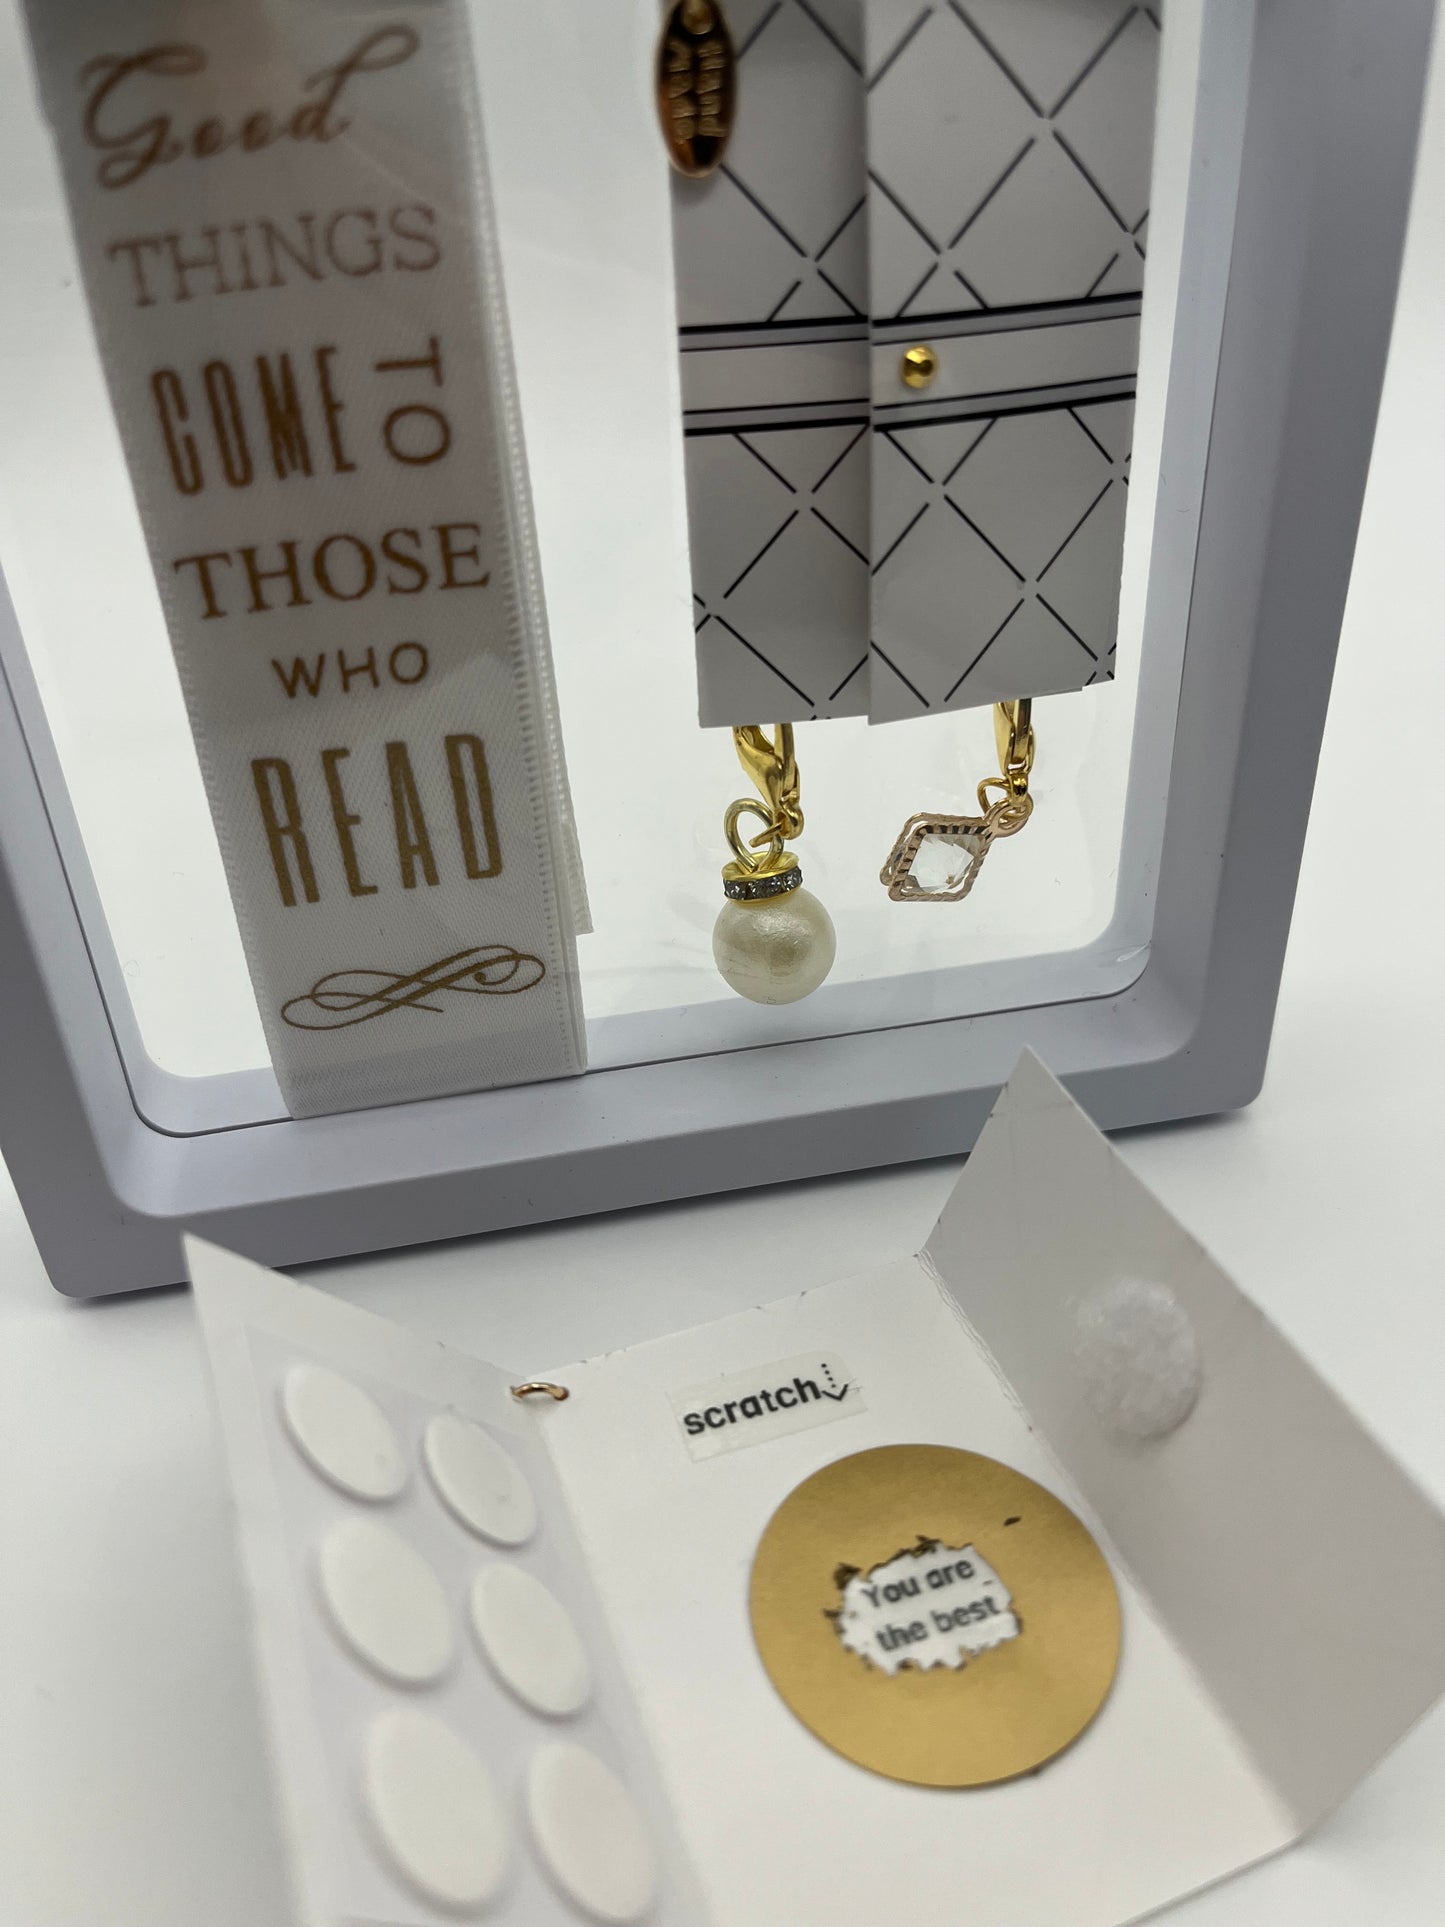 "Good Things Come to Those Who Read" – White Satin Reusable Adhesive Bookmark with Two Charms in Gift Box + Hidden Scratch Gift Message